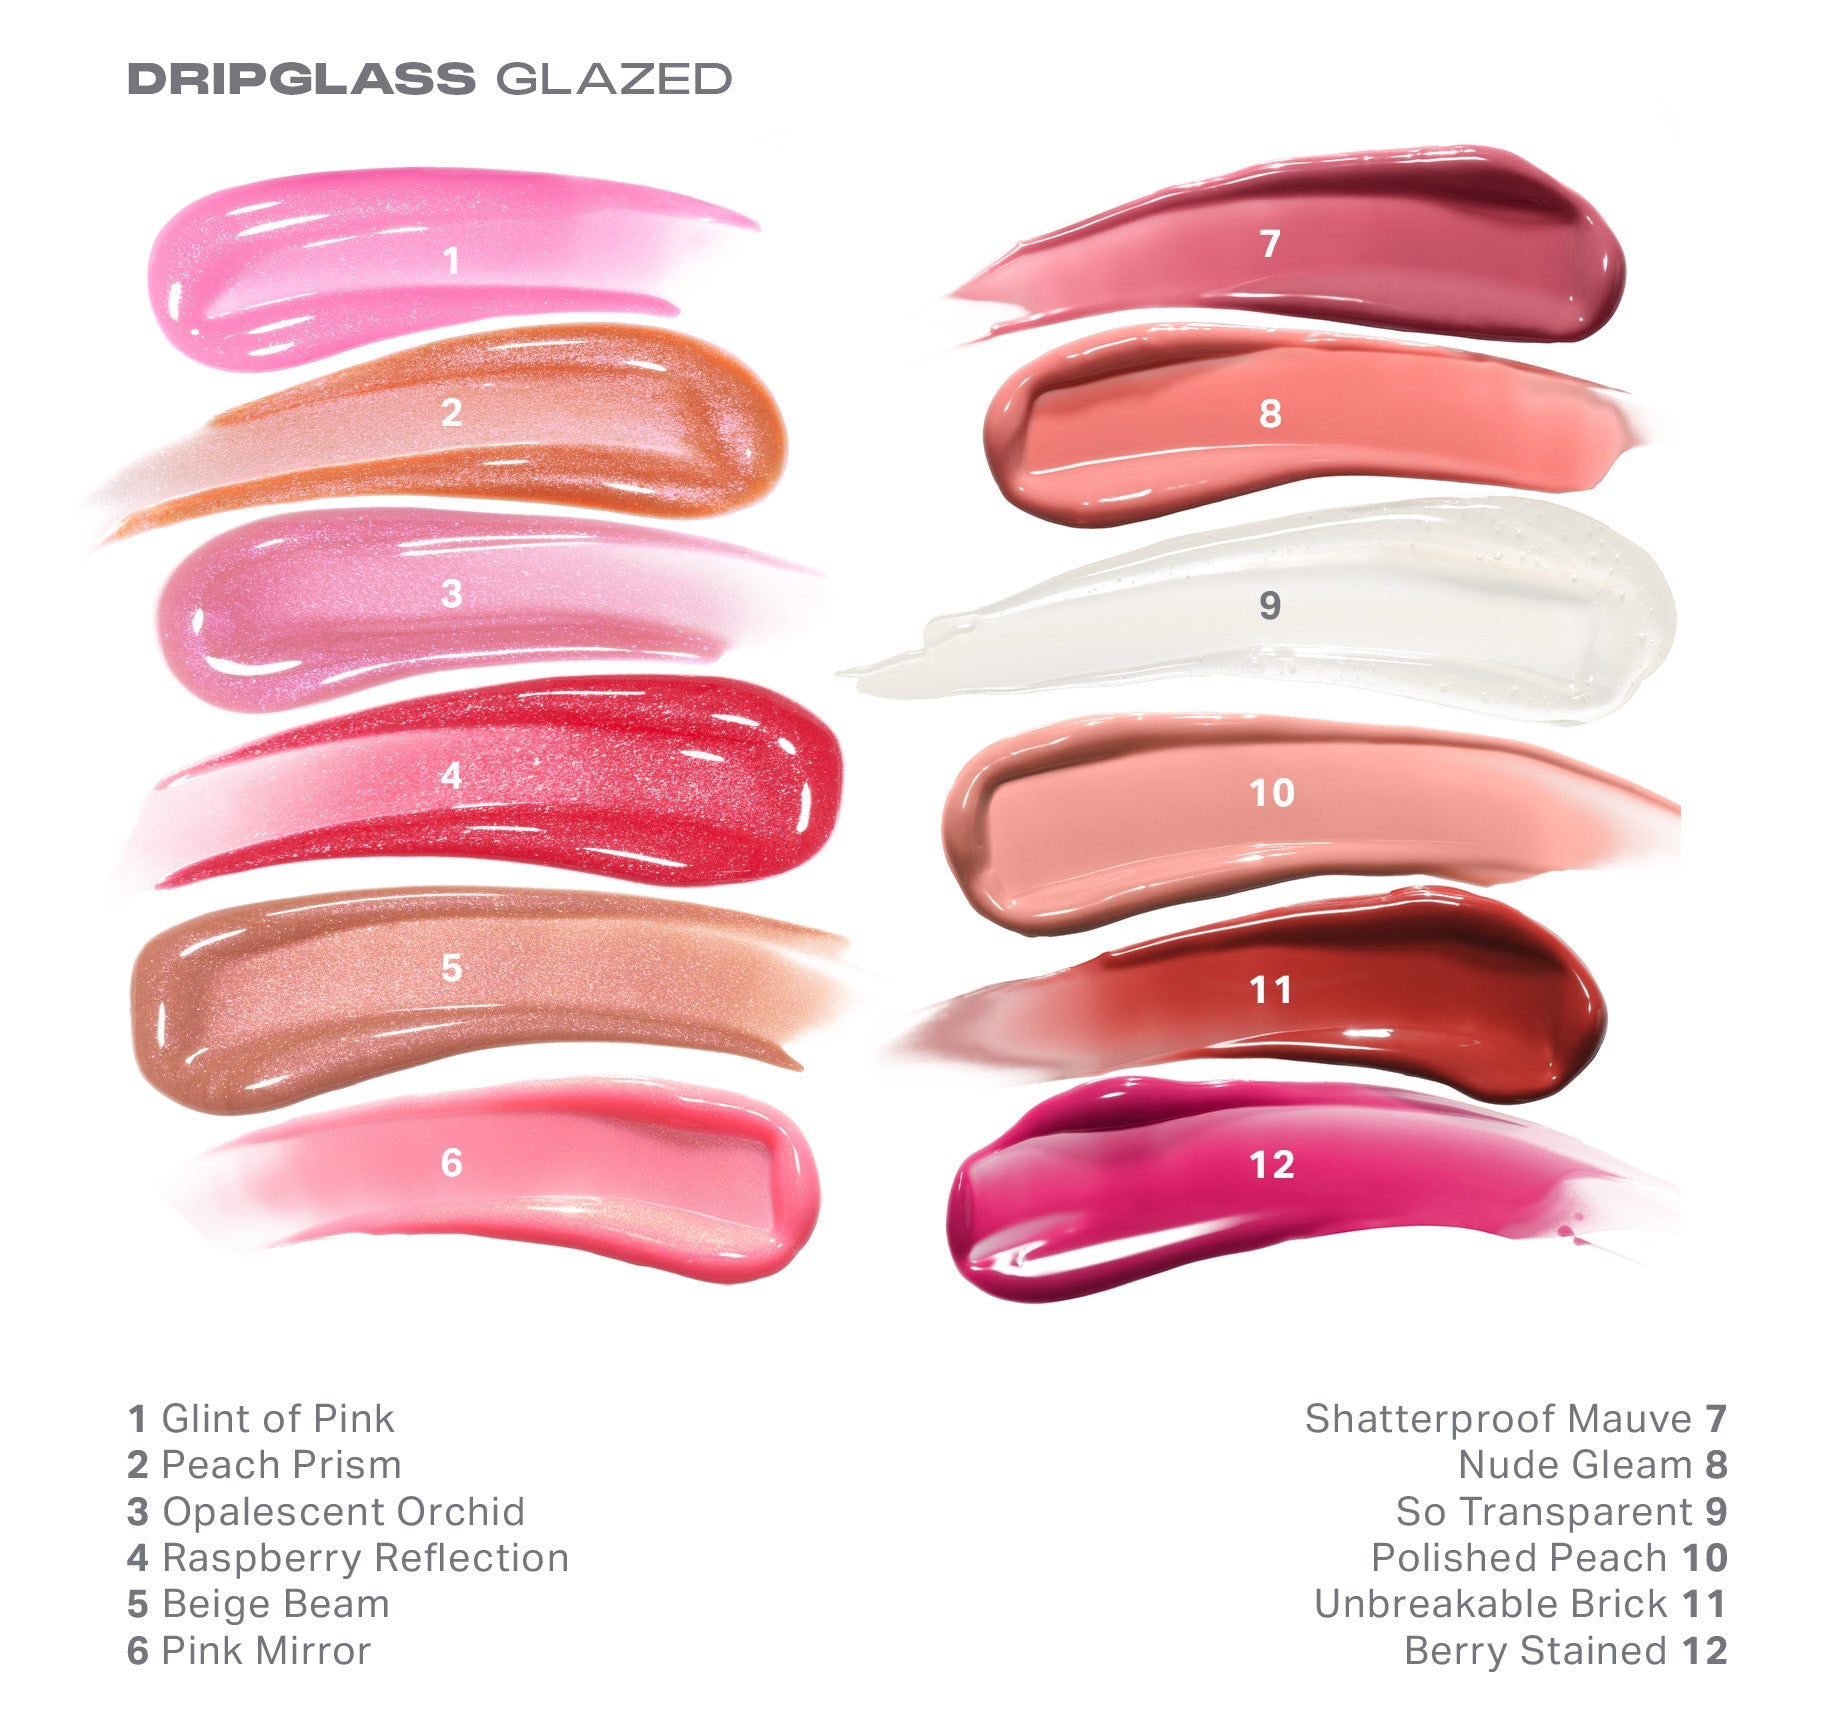 Dripglass Glazed High Shine Lip Gloss - Opalescent Orchid - Image 4